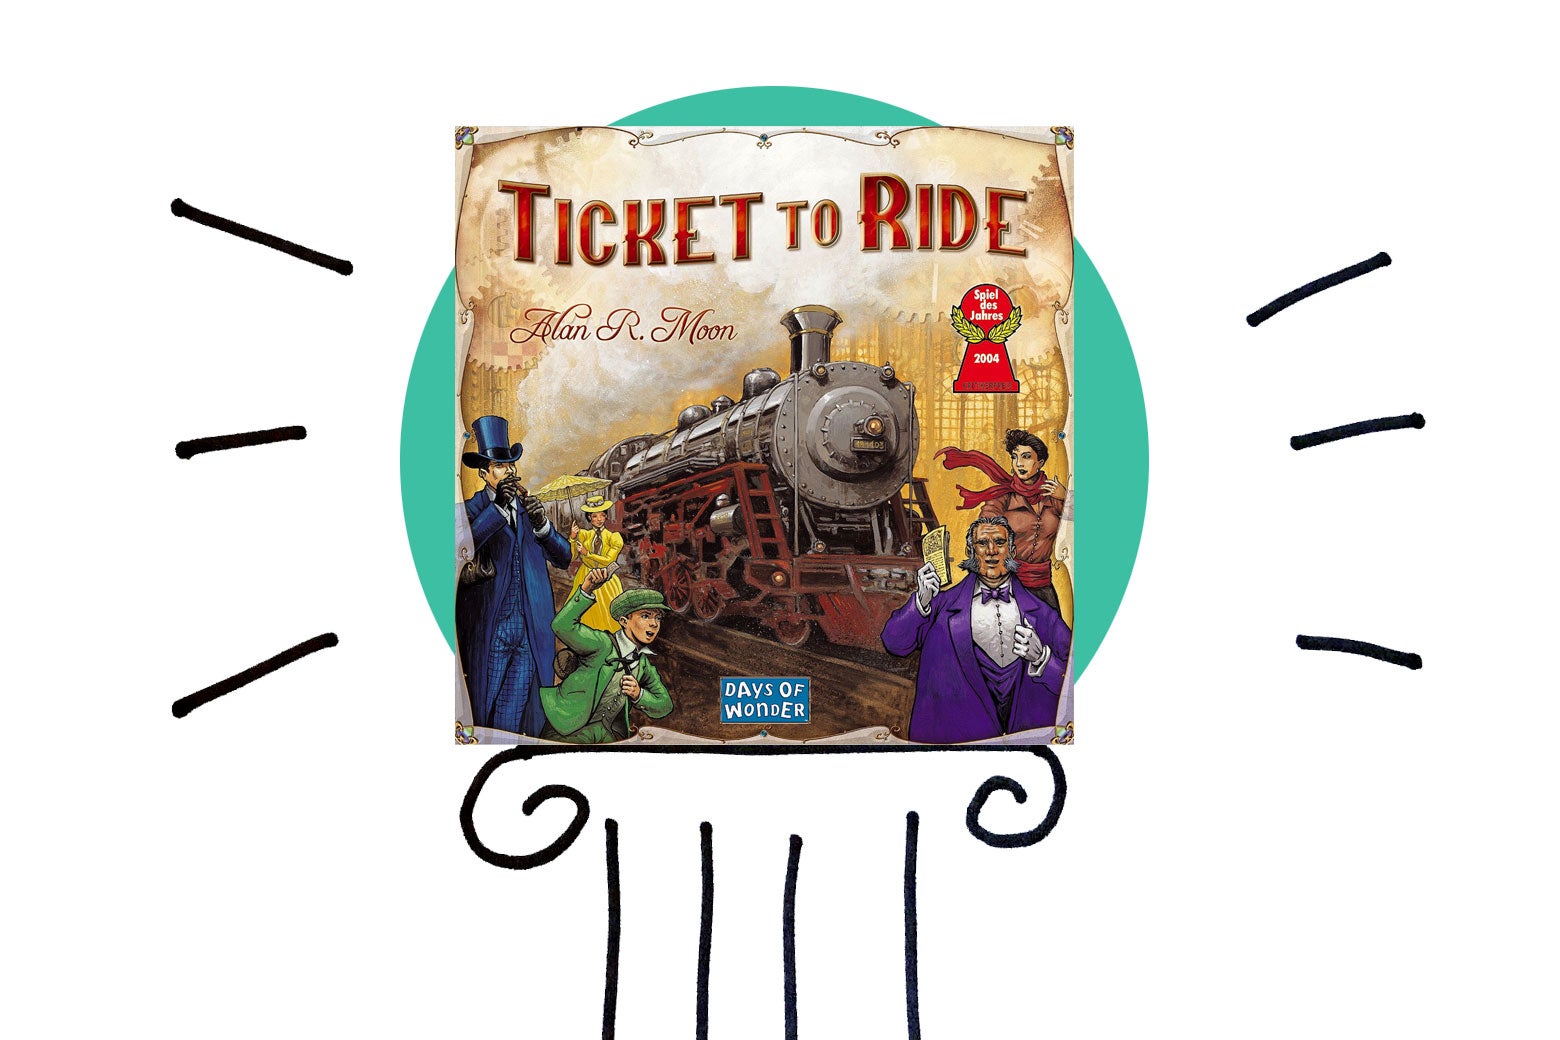 Ticket to Ride on a pedestal.